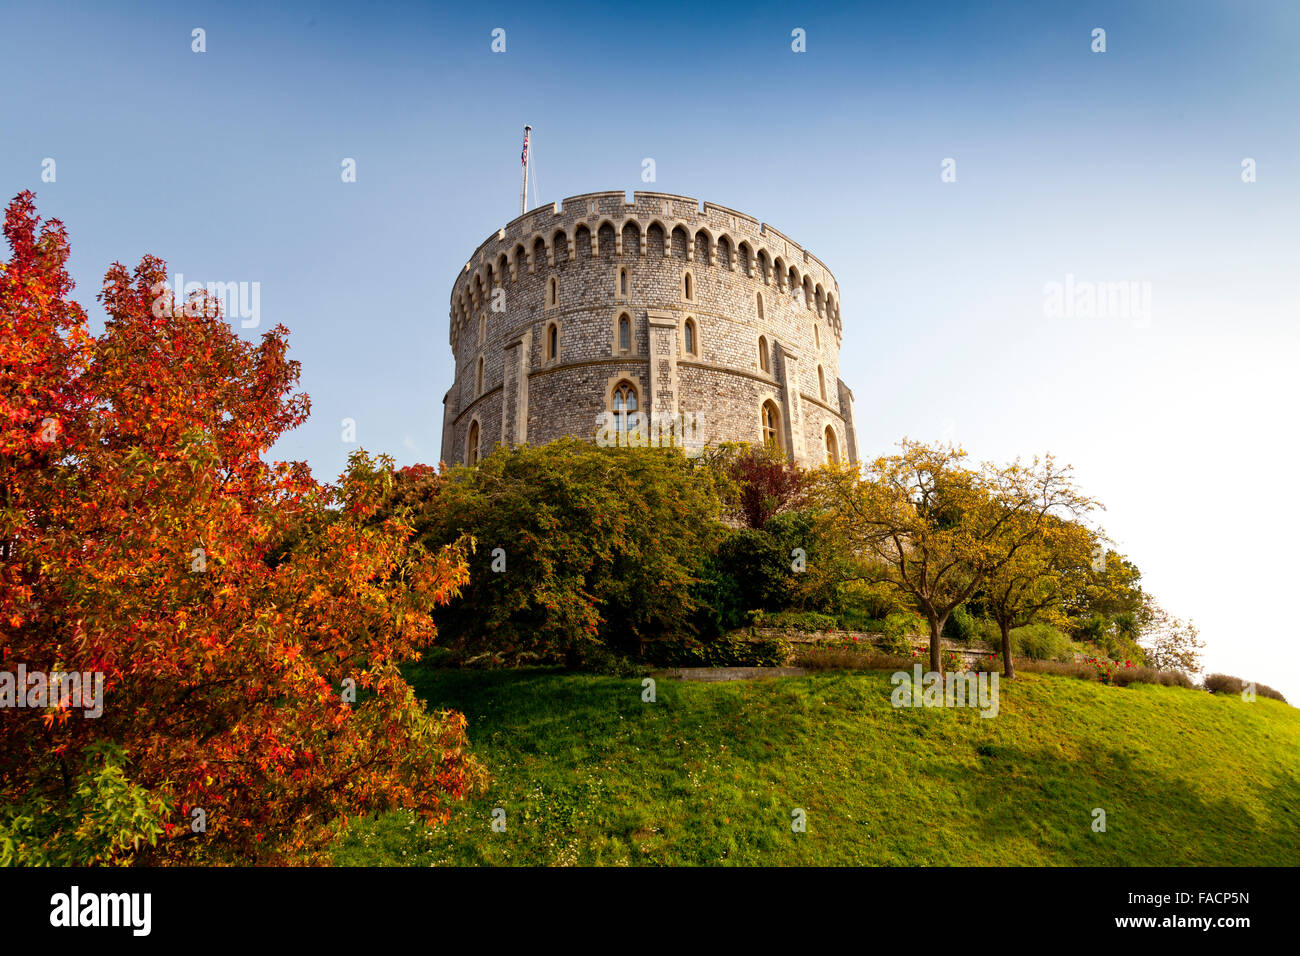 The Round Tower at Windsor Castle, Berkshire, England, UK Stock Photo